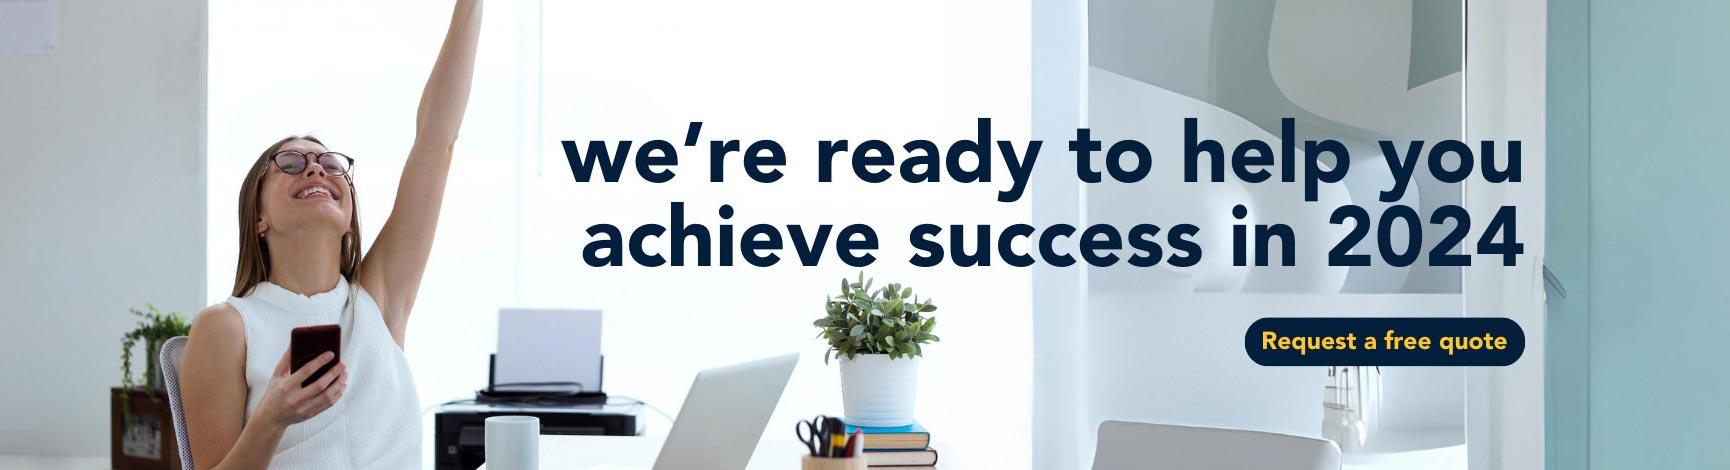 Snap - We're ready to help you achieve success in 2024